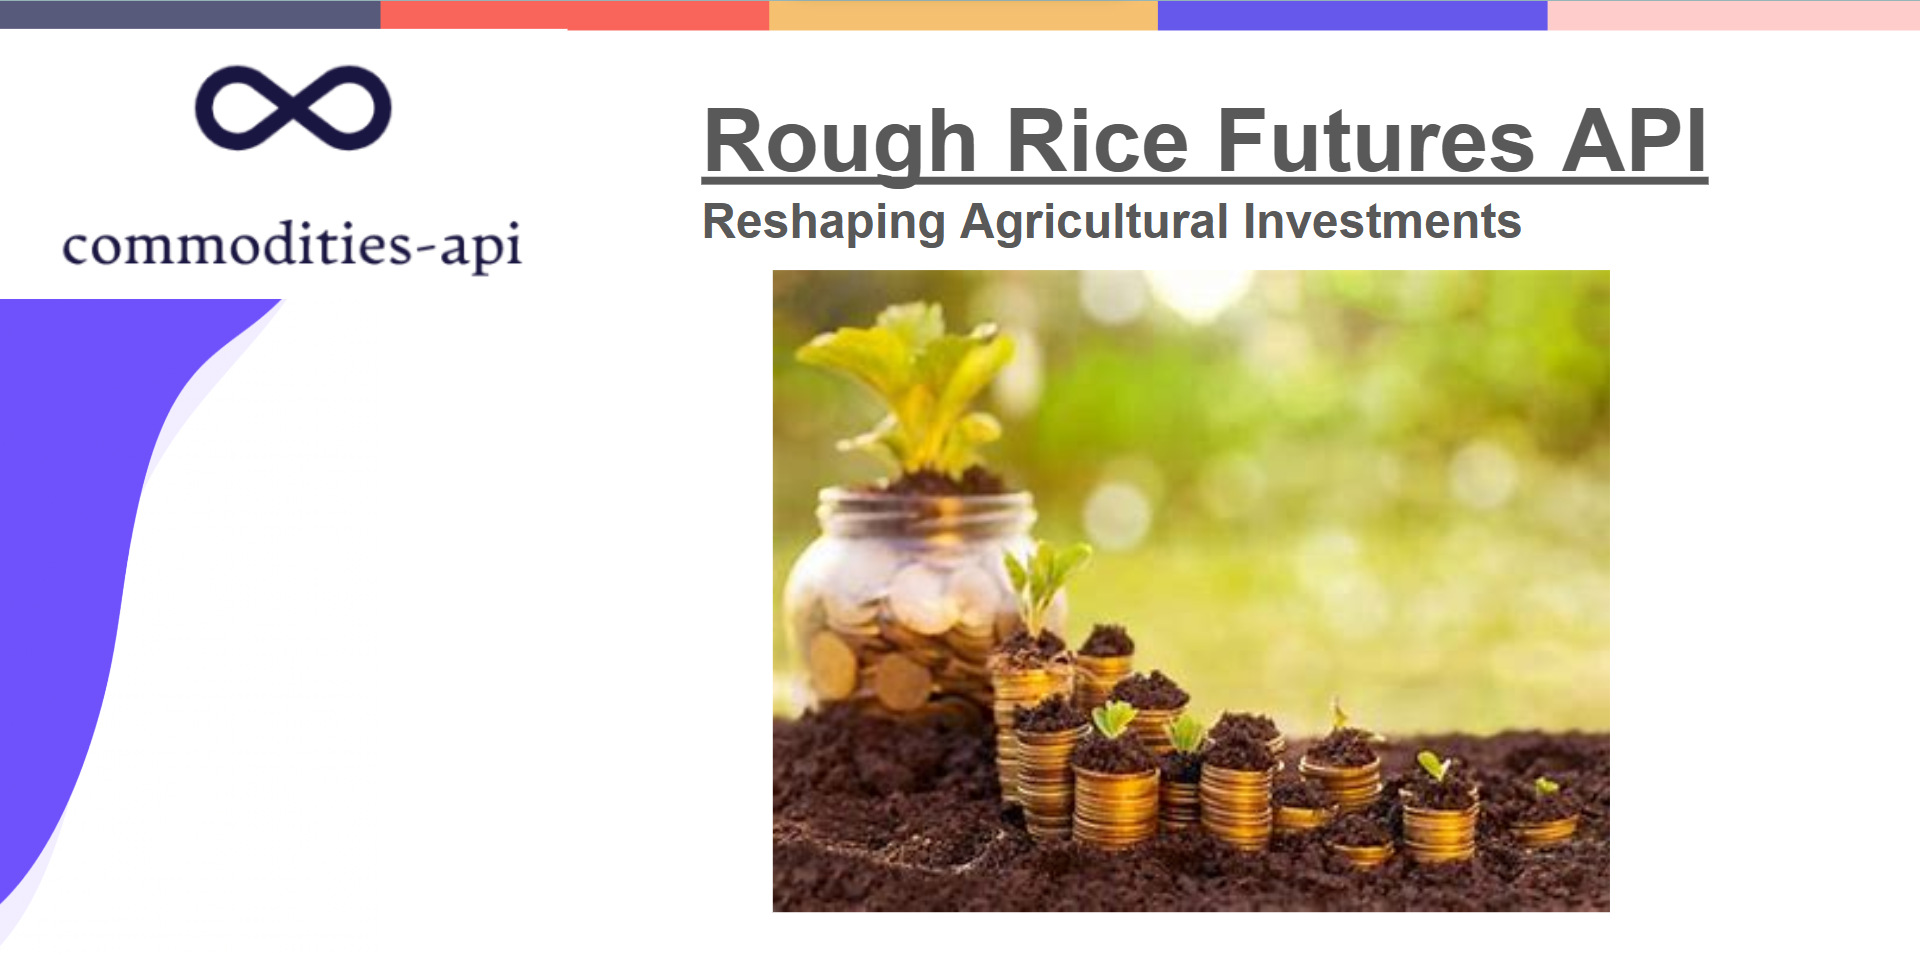 How Rough Rice Futures API Is Reshaping Agricultural Investments